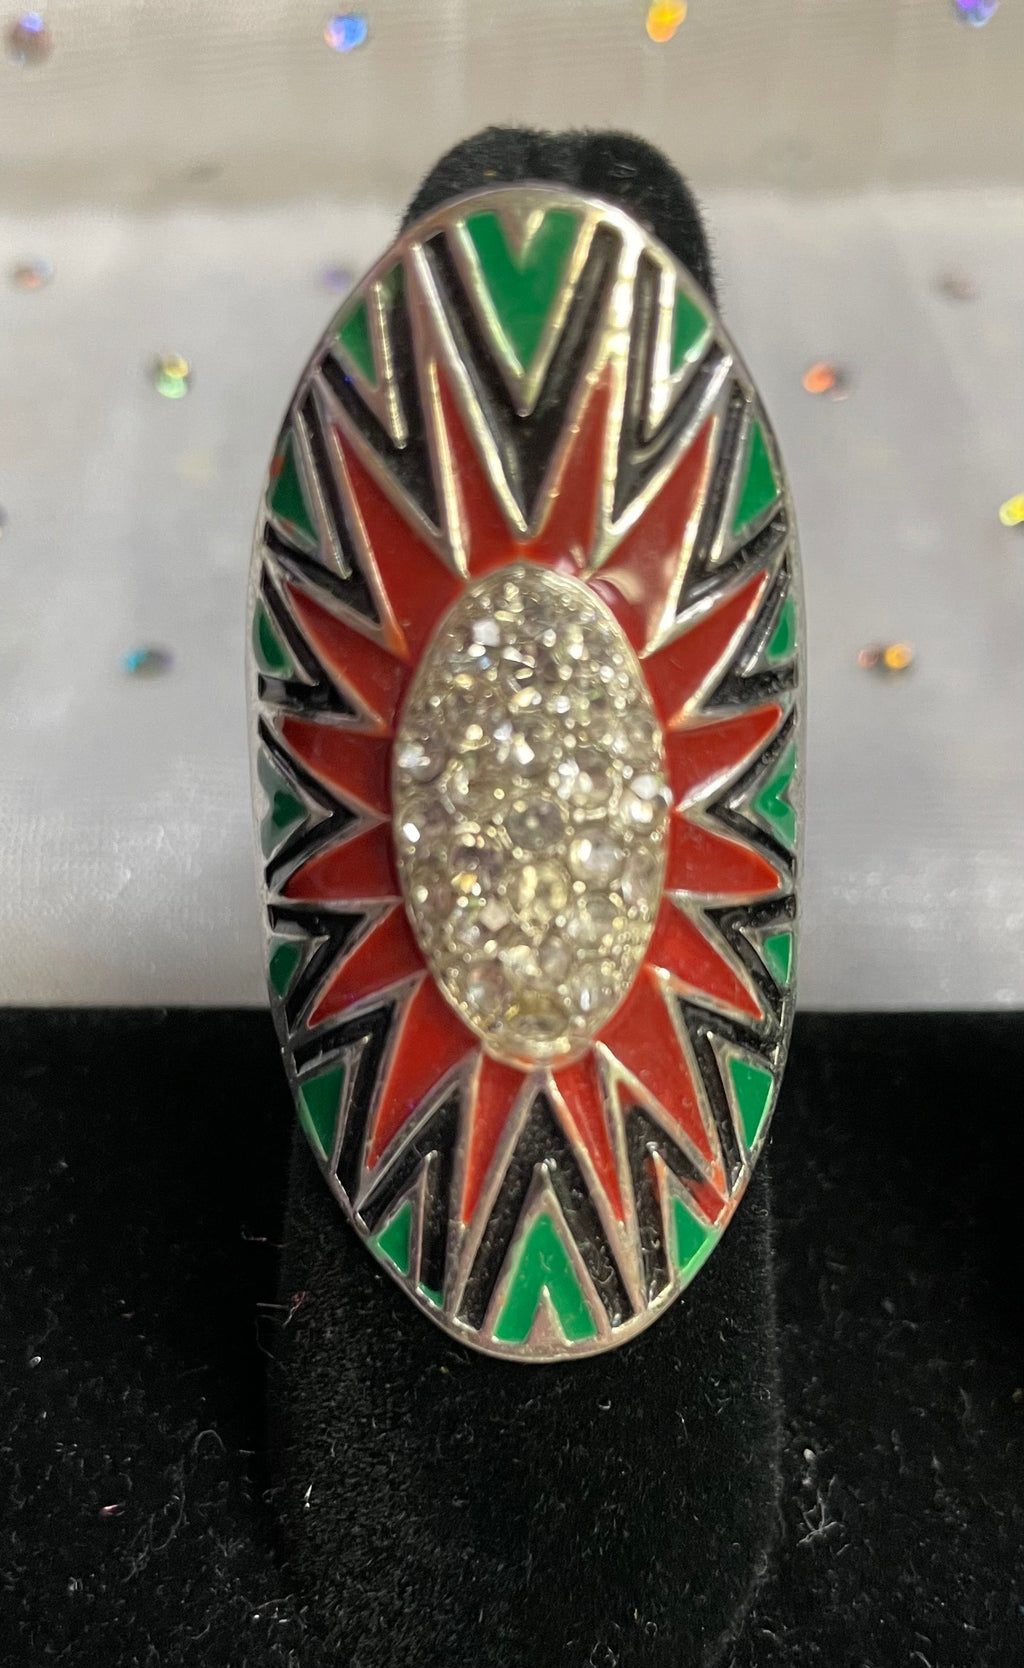 LARGE OVAL RING DESIGNS IN BRILLIANT COLORS - Lil Monkey Boutique